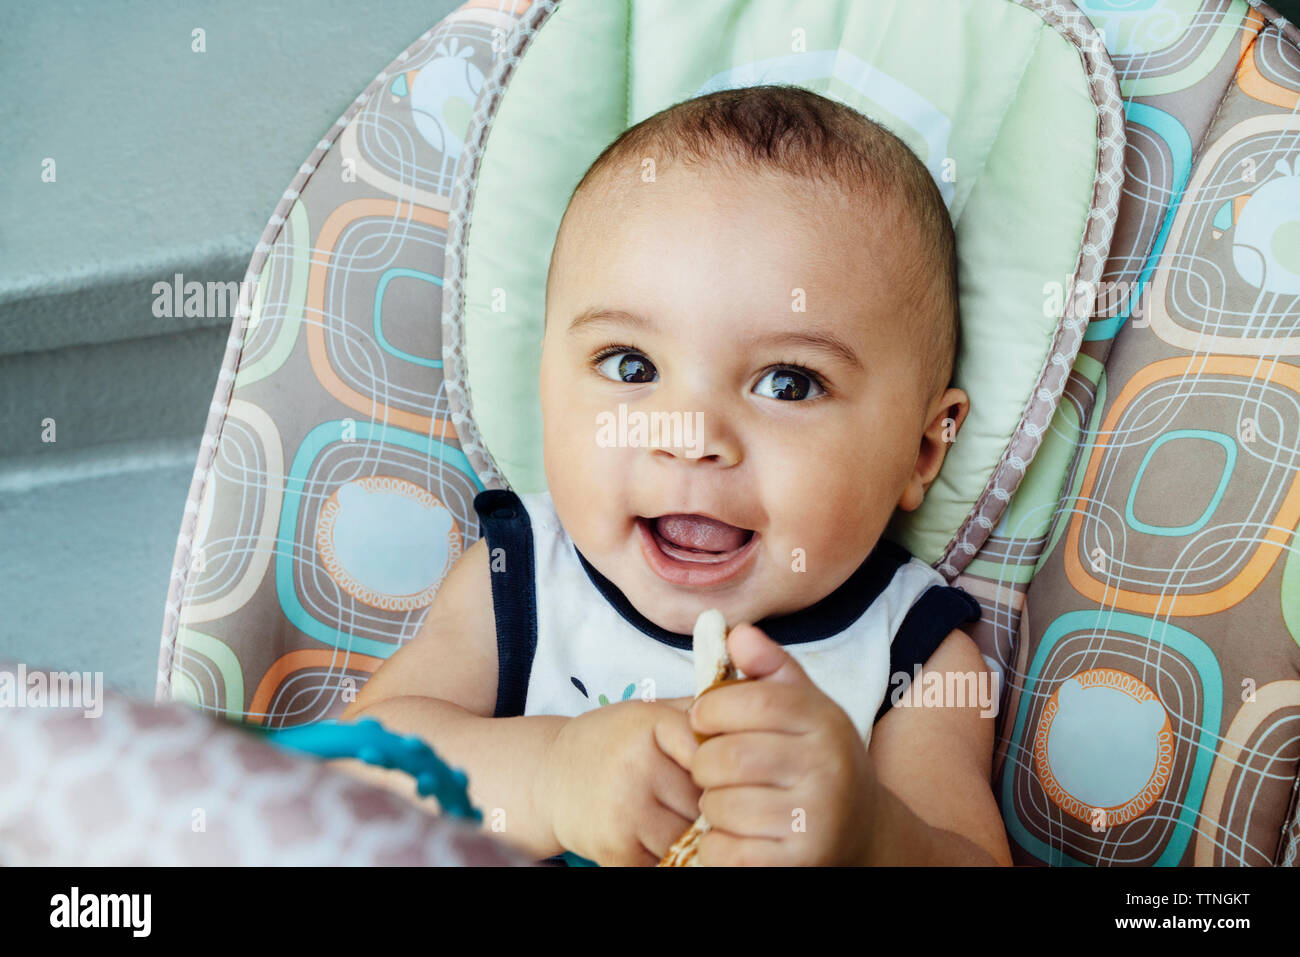 Portrait of smiling baby boy at home Stock Photo